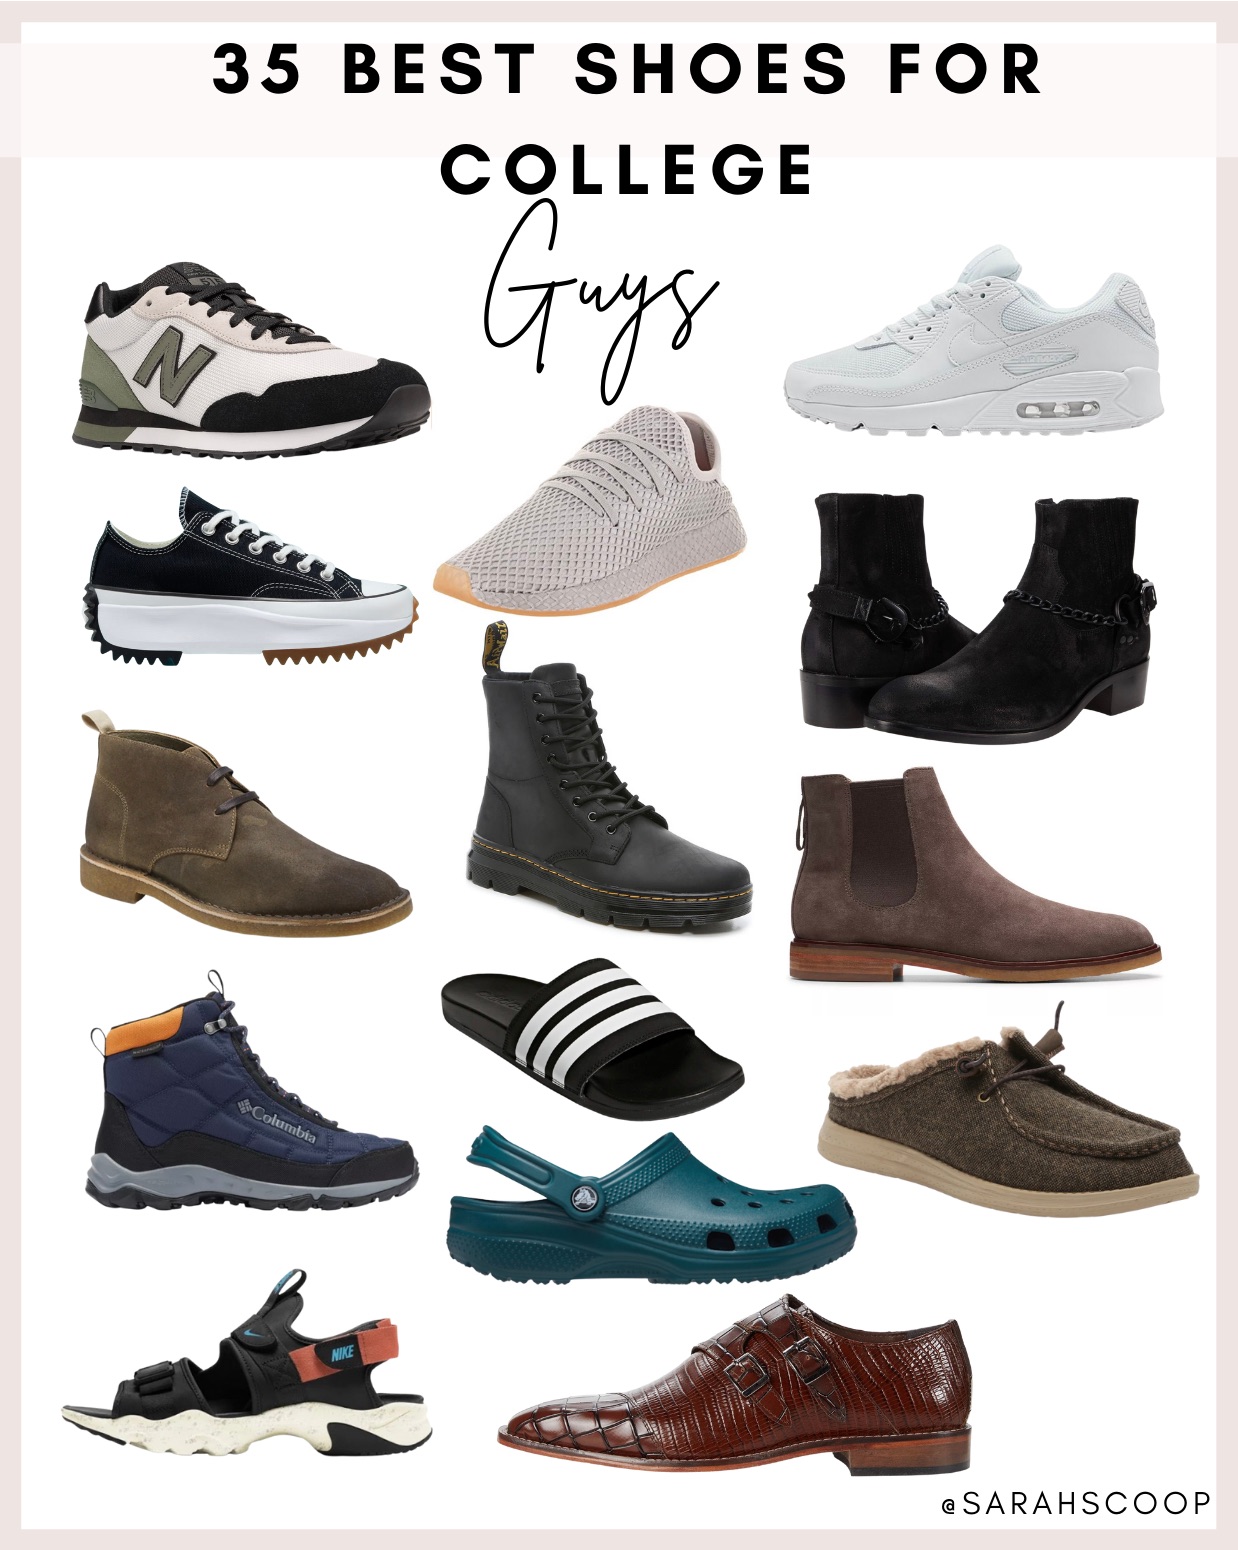 The 35 Best Shoes For College Guys - Sarah Scoop